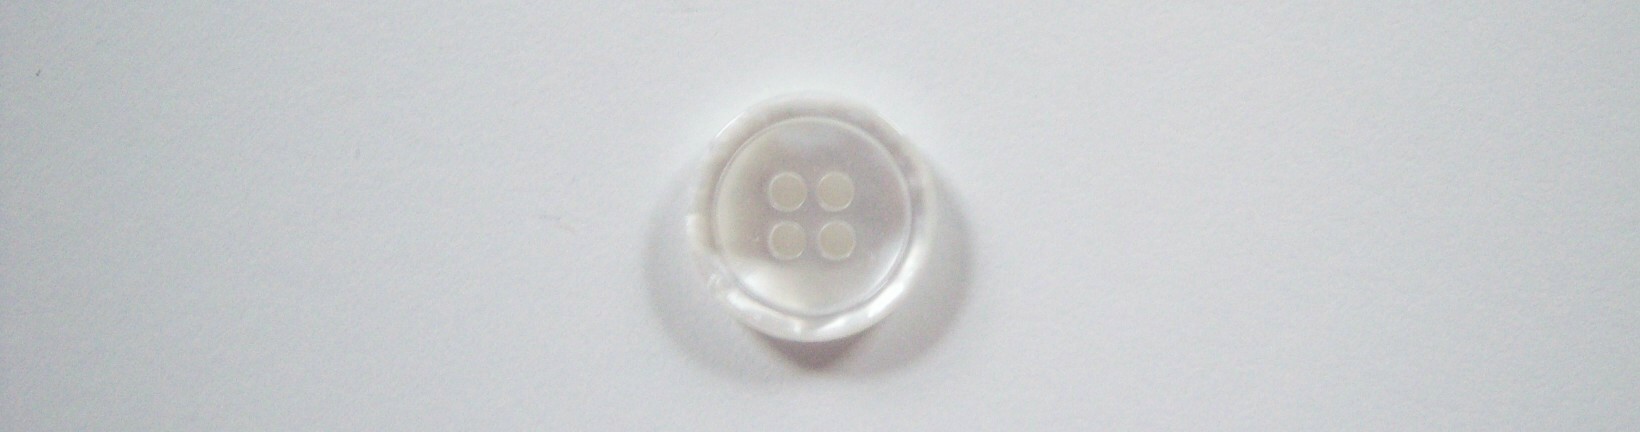 White Pearlized 3/4" 4 Hole Button